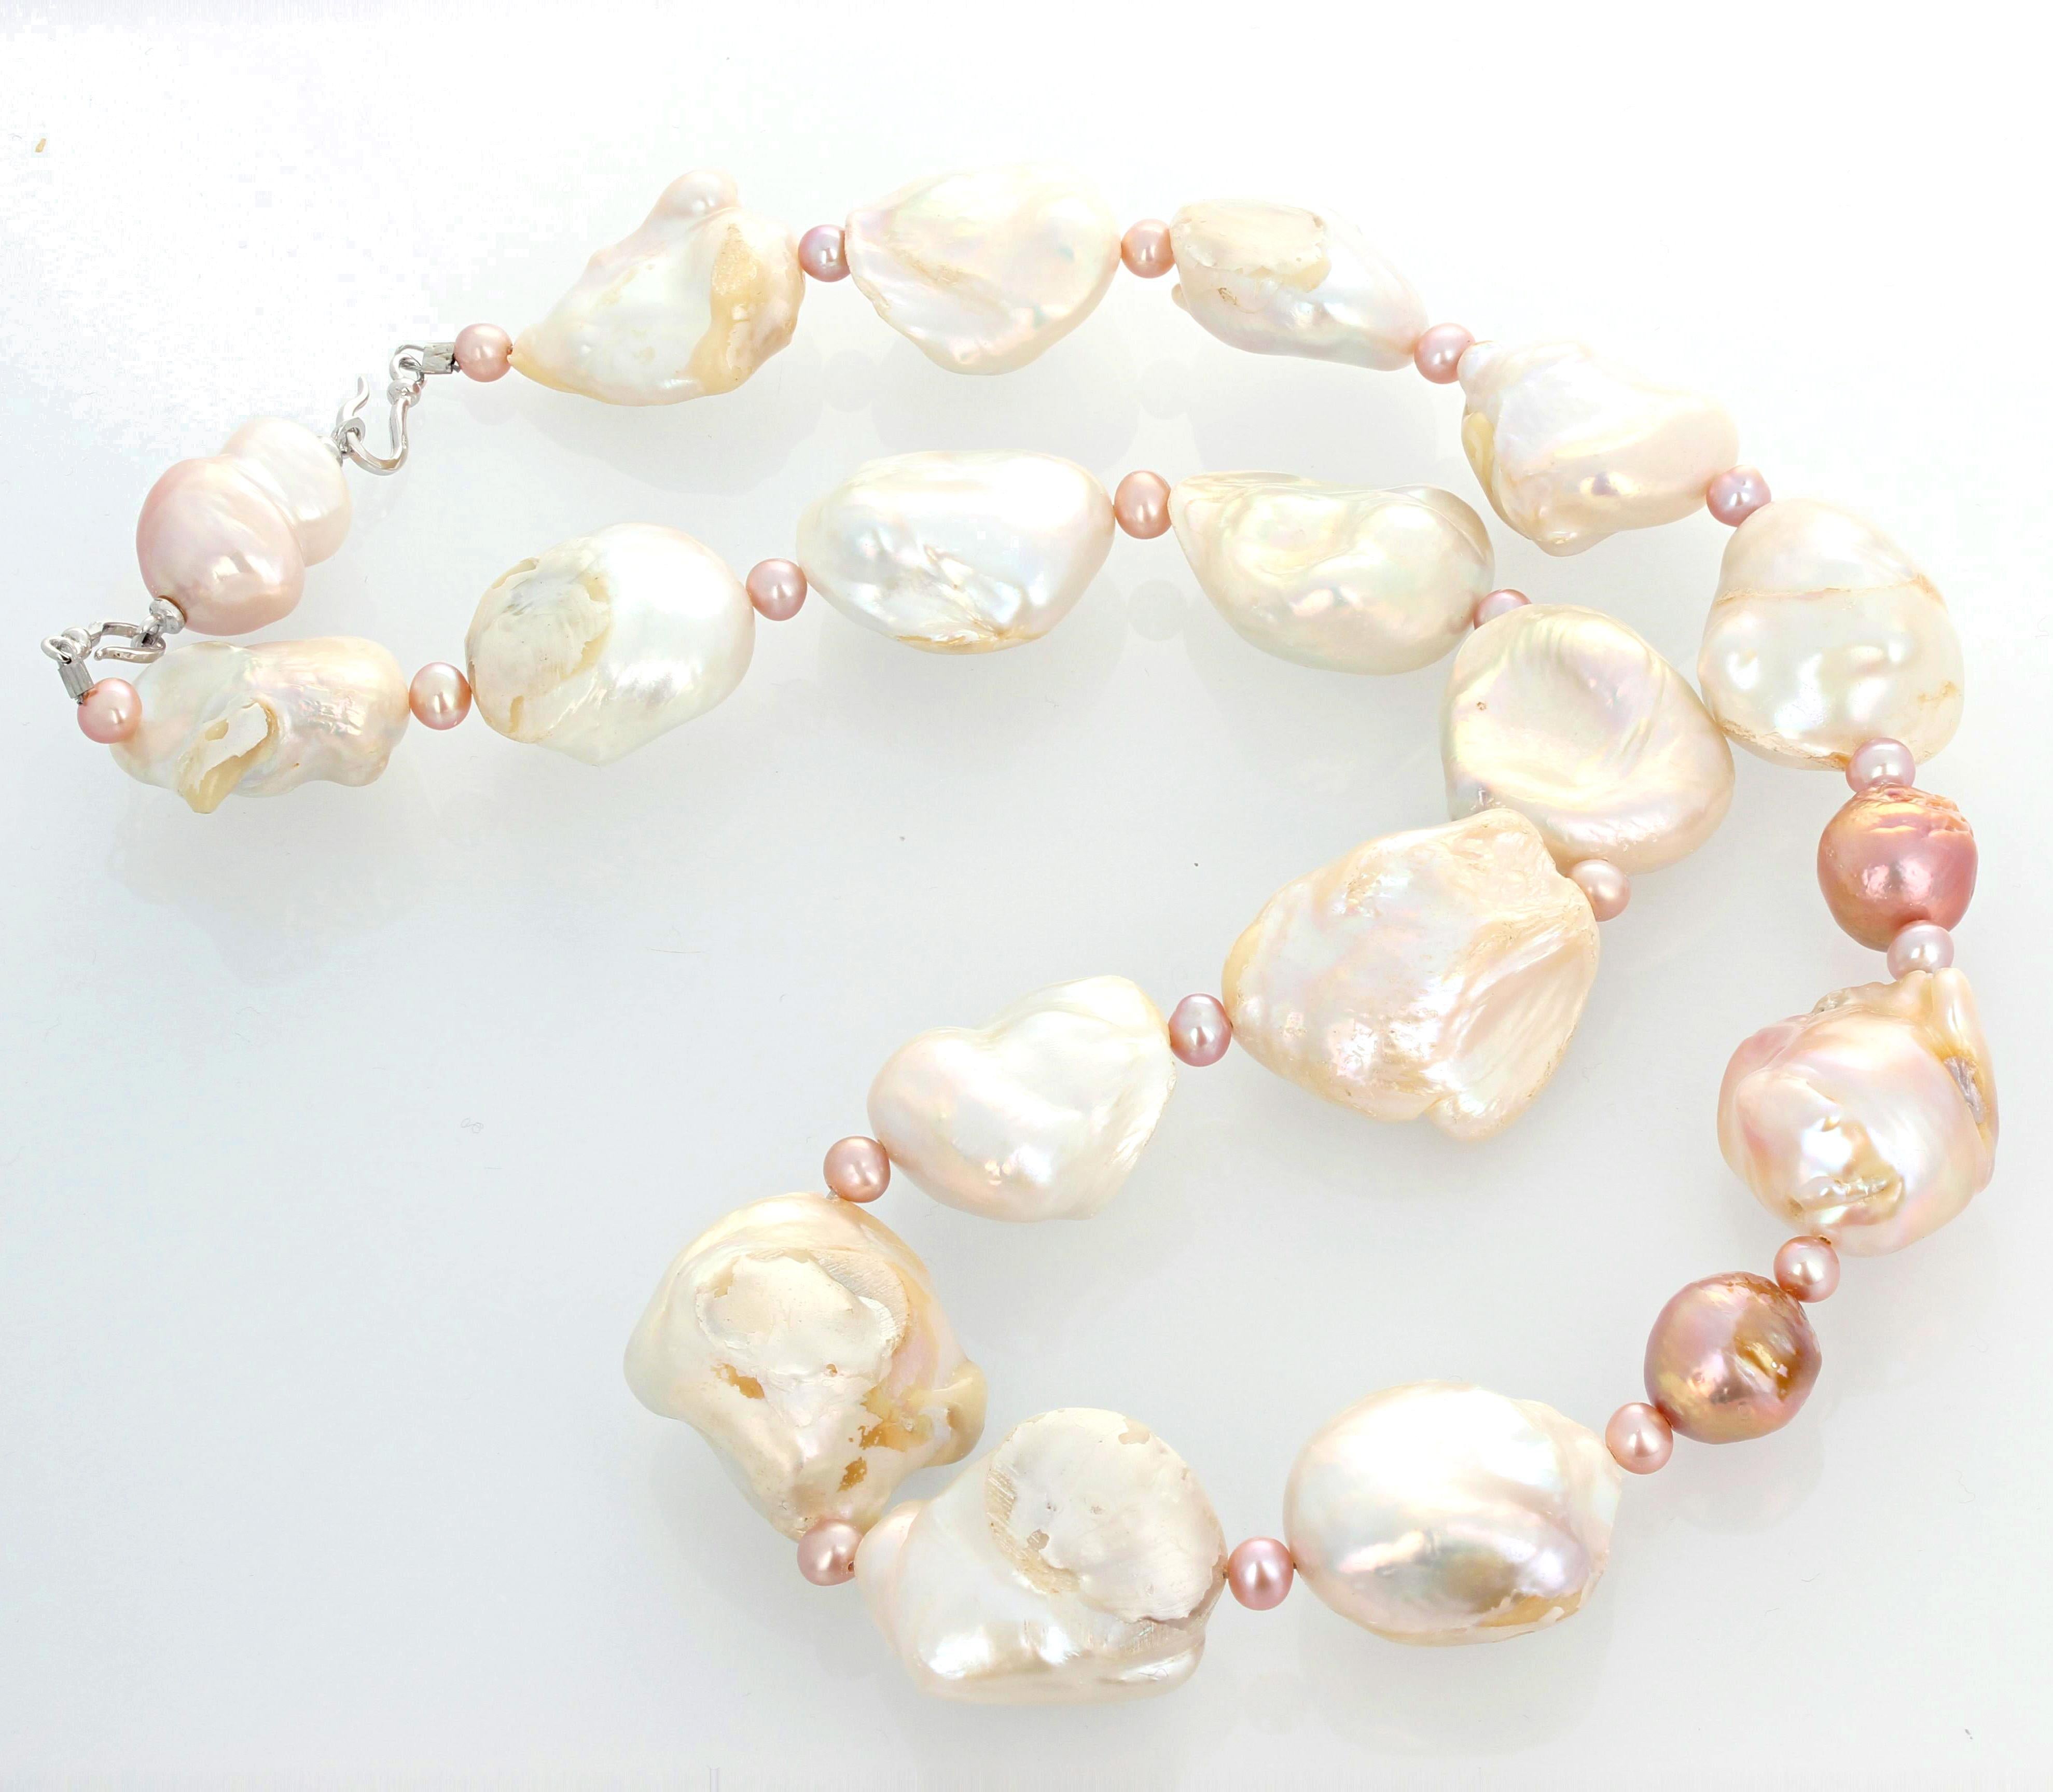 Bead AJD Dramatic Cultured Glowing Baroque White Pearls & Pinkish Pearl 22